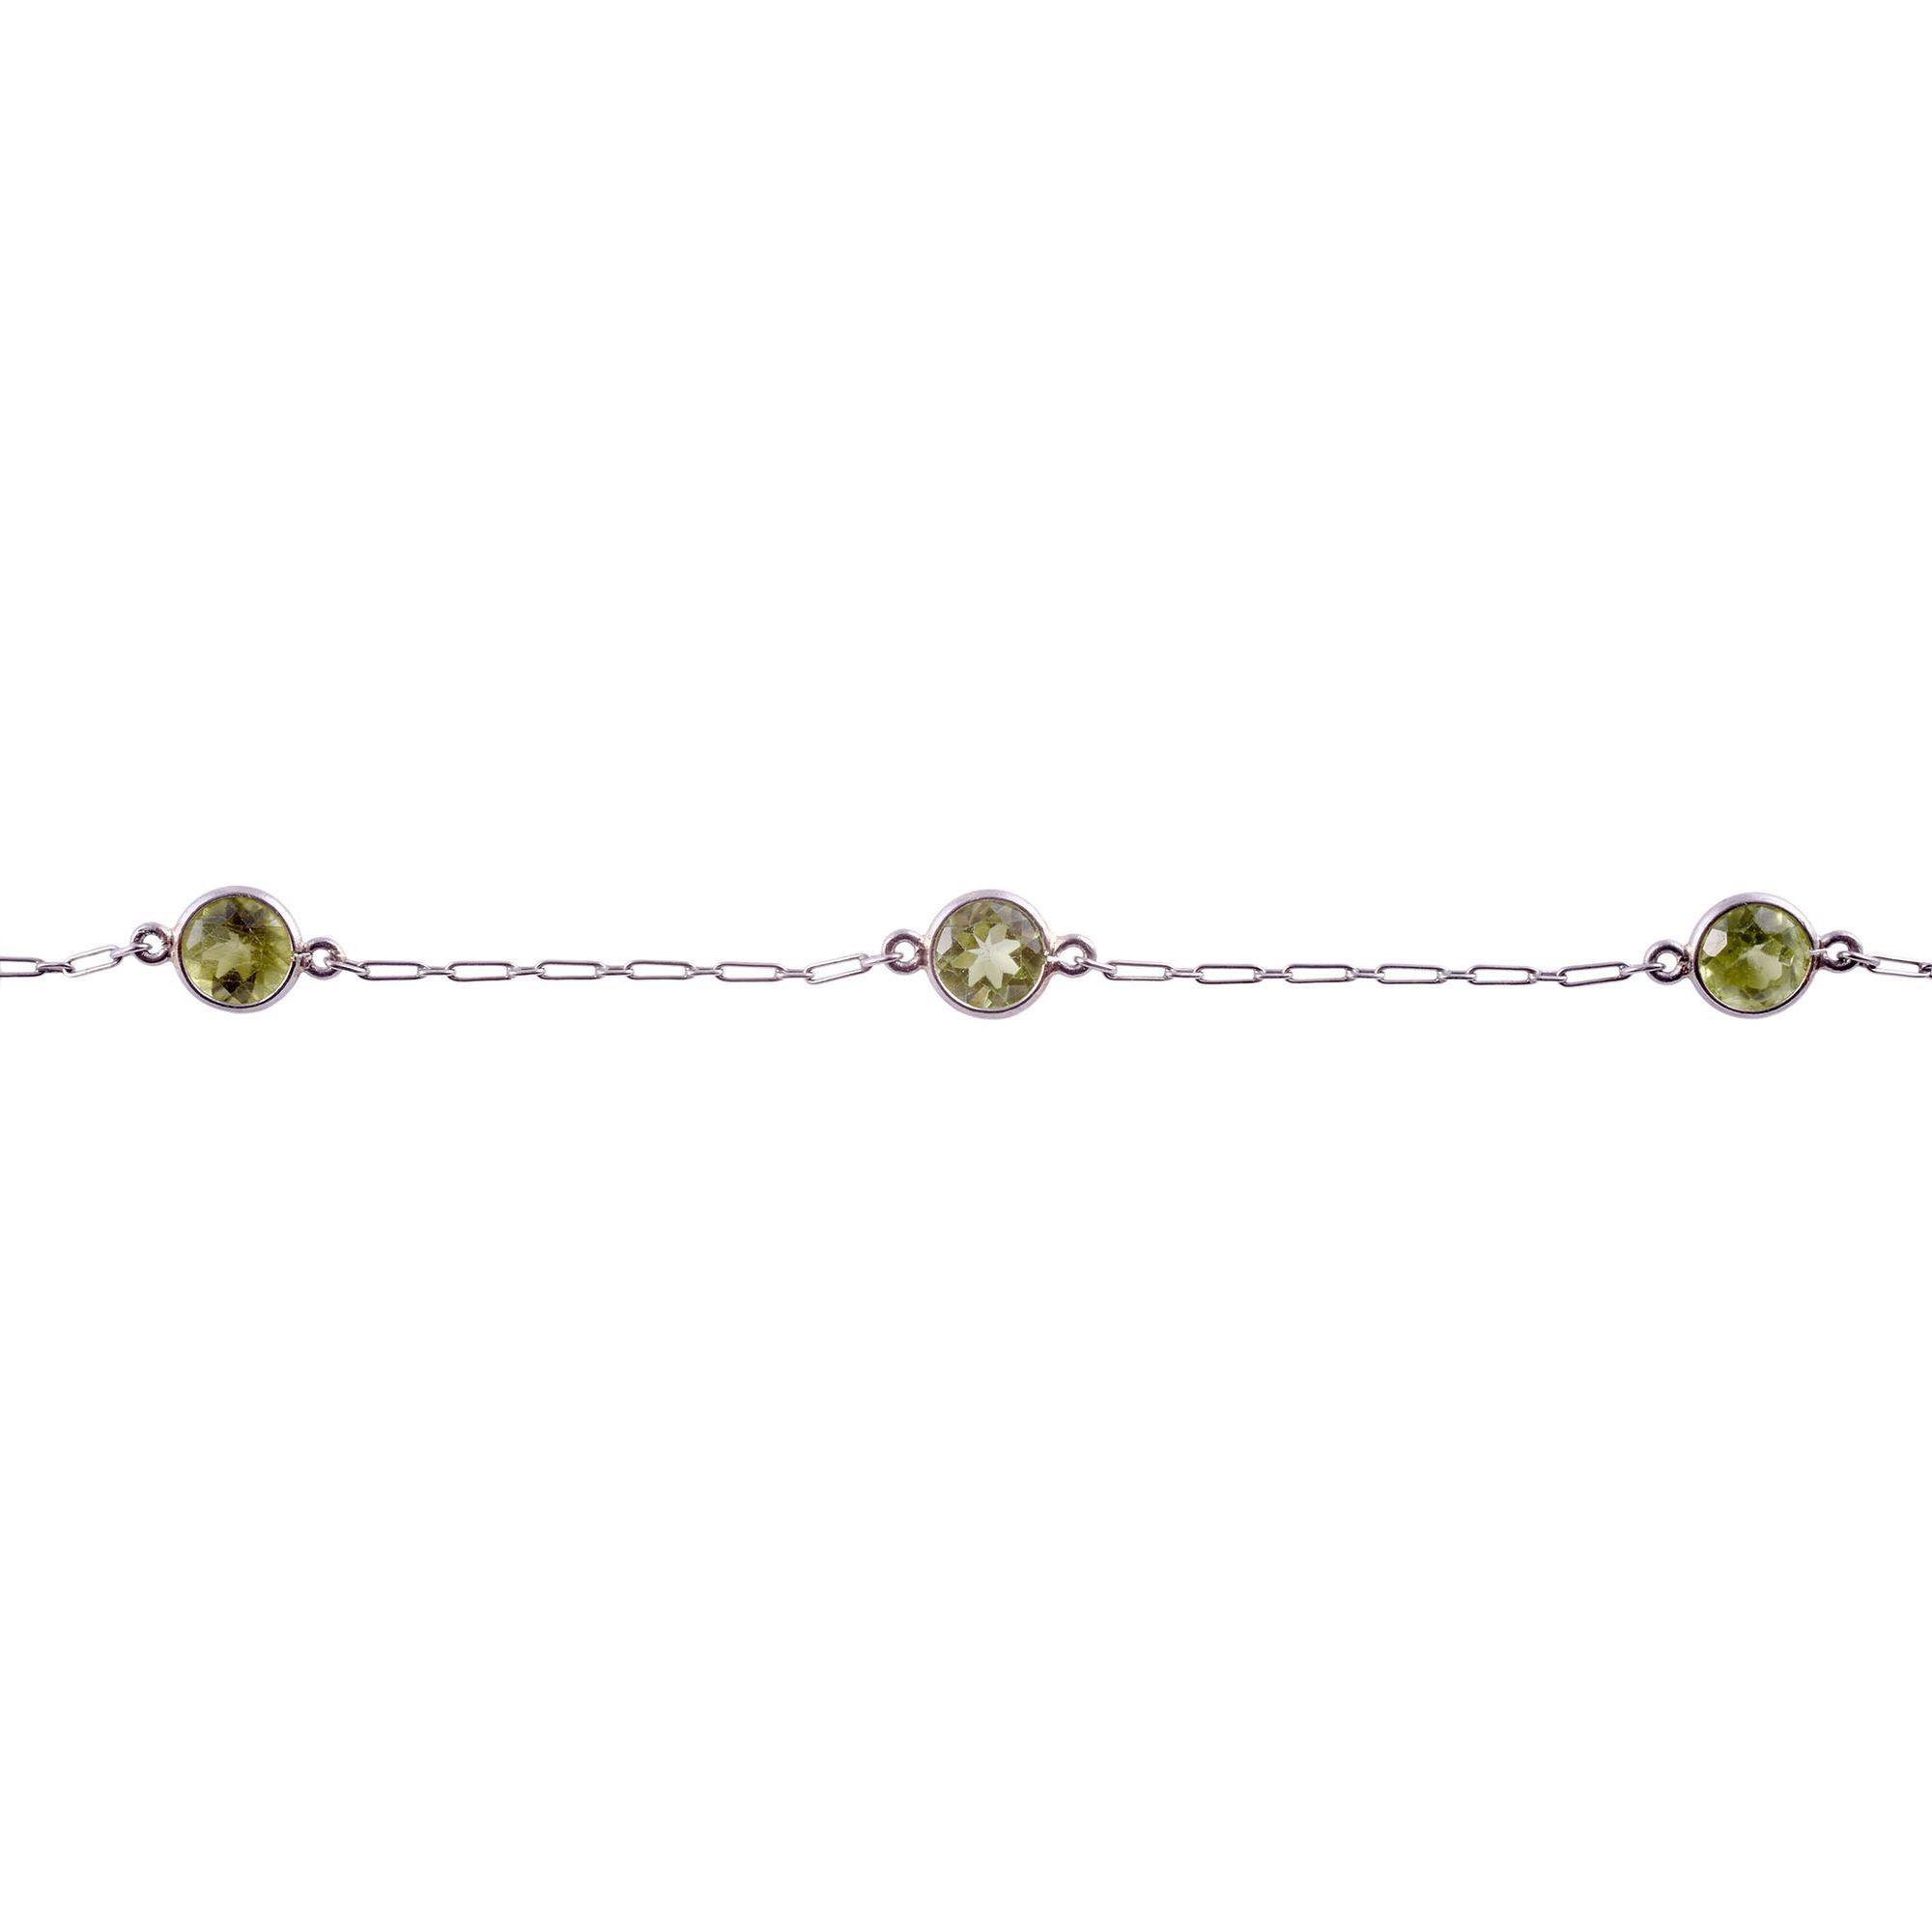 Estate peridot platinum necklace. This platinum necklace features 11 bezel set 5.55mm round peridot at approximately 8.50 carat total weight. The peridot have a vibrant yellow green color. [KIMH 2901 P]
 
Dimensions
 
18.375″L